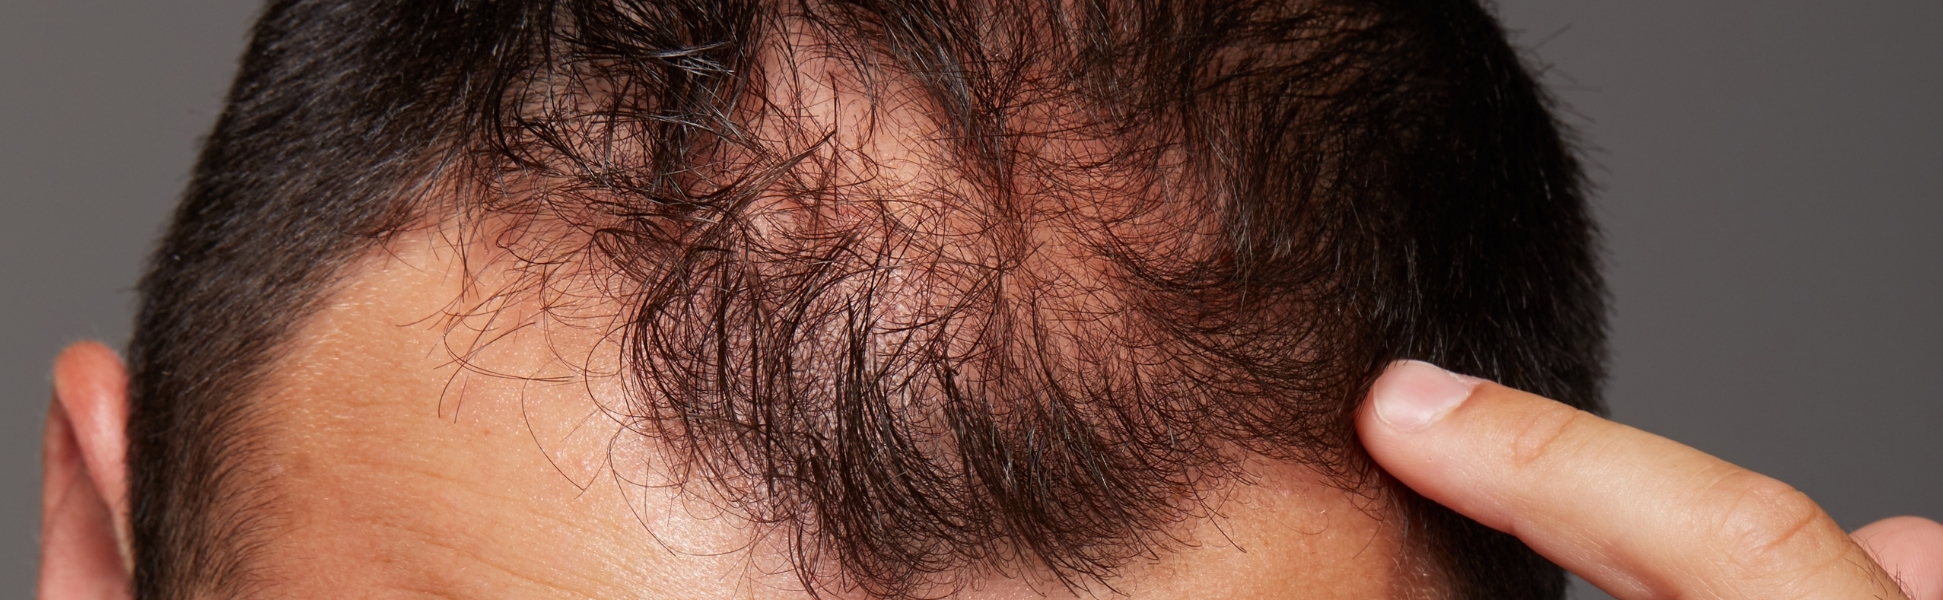 Treatment for scarring alopecia